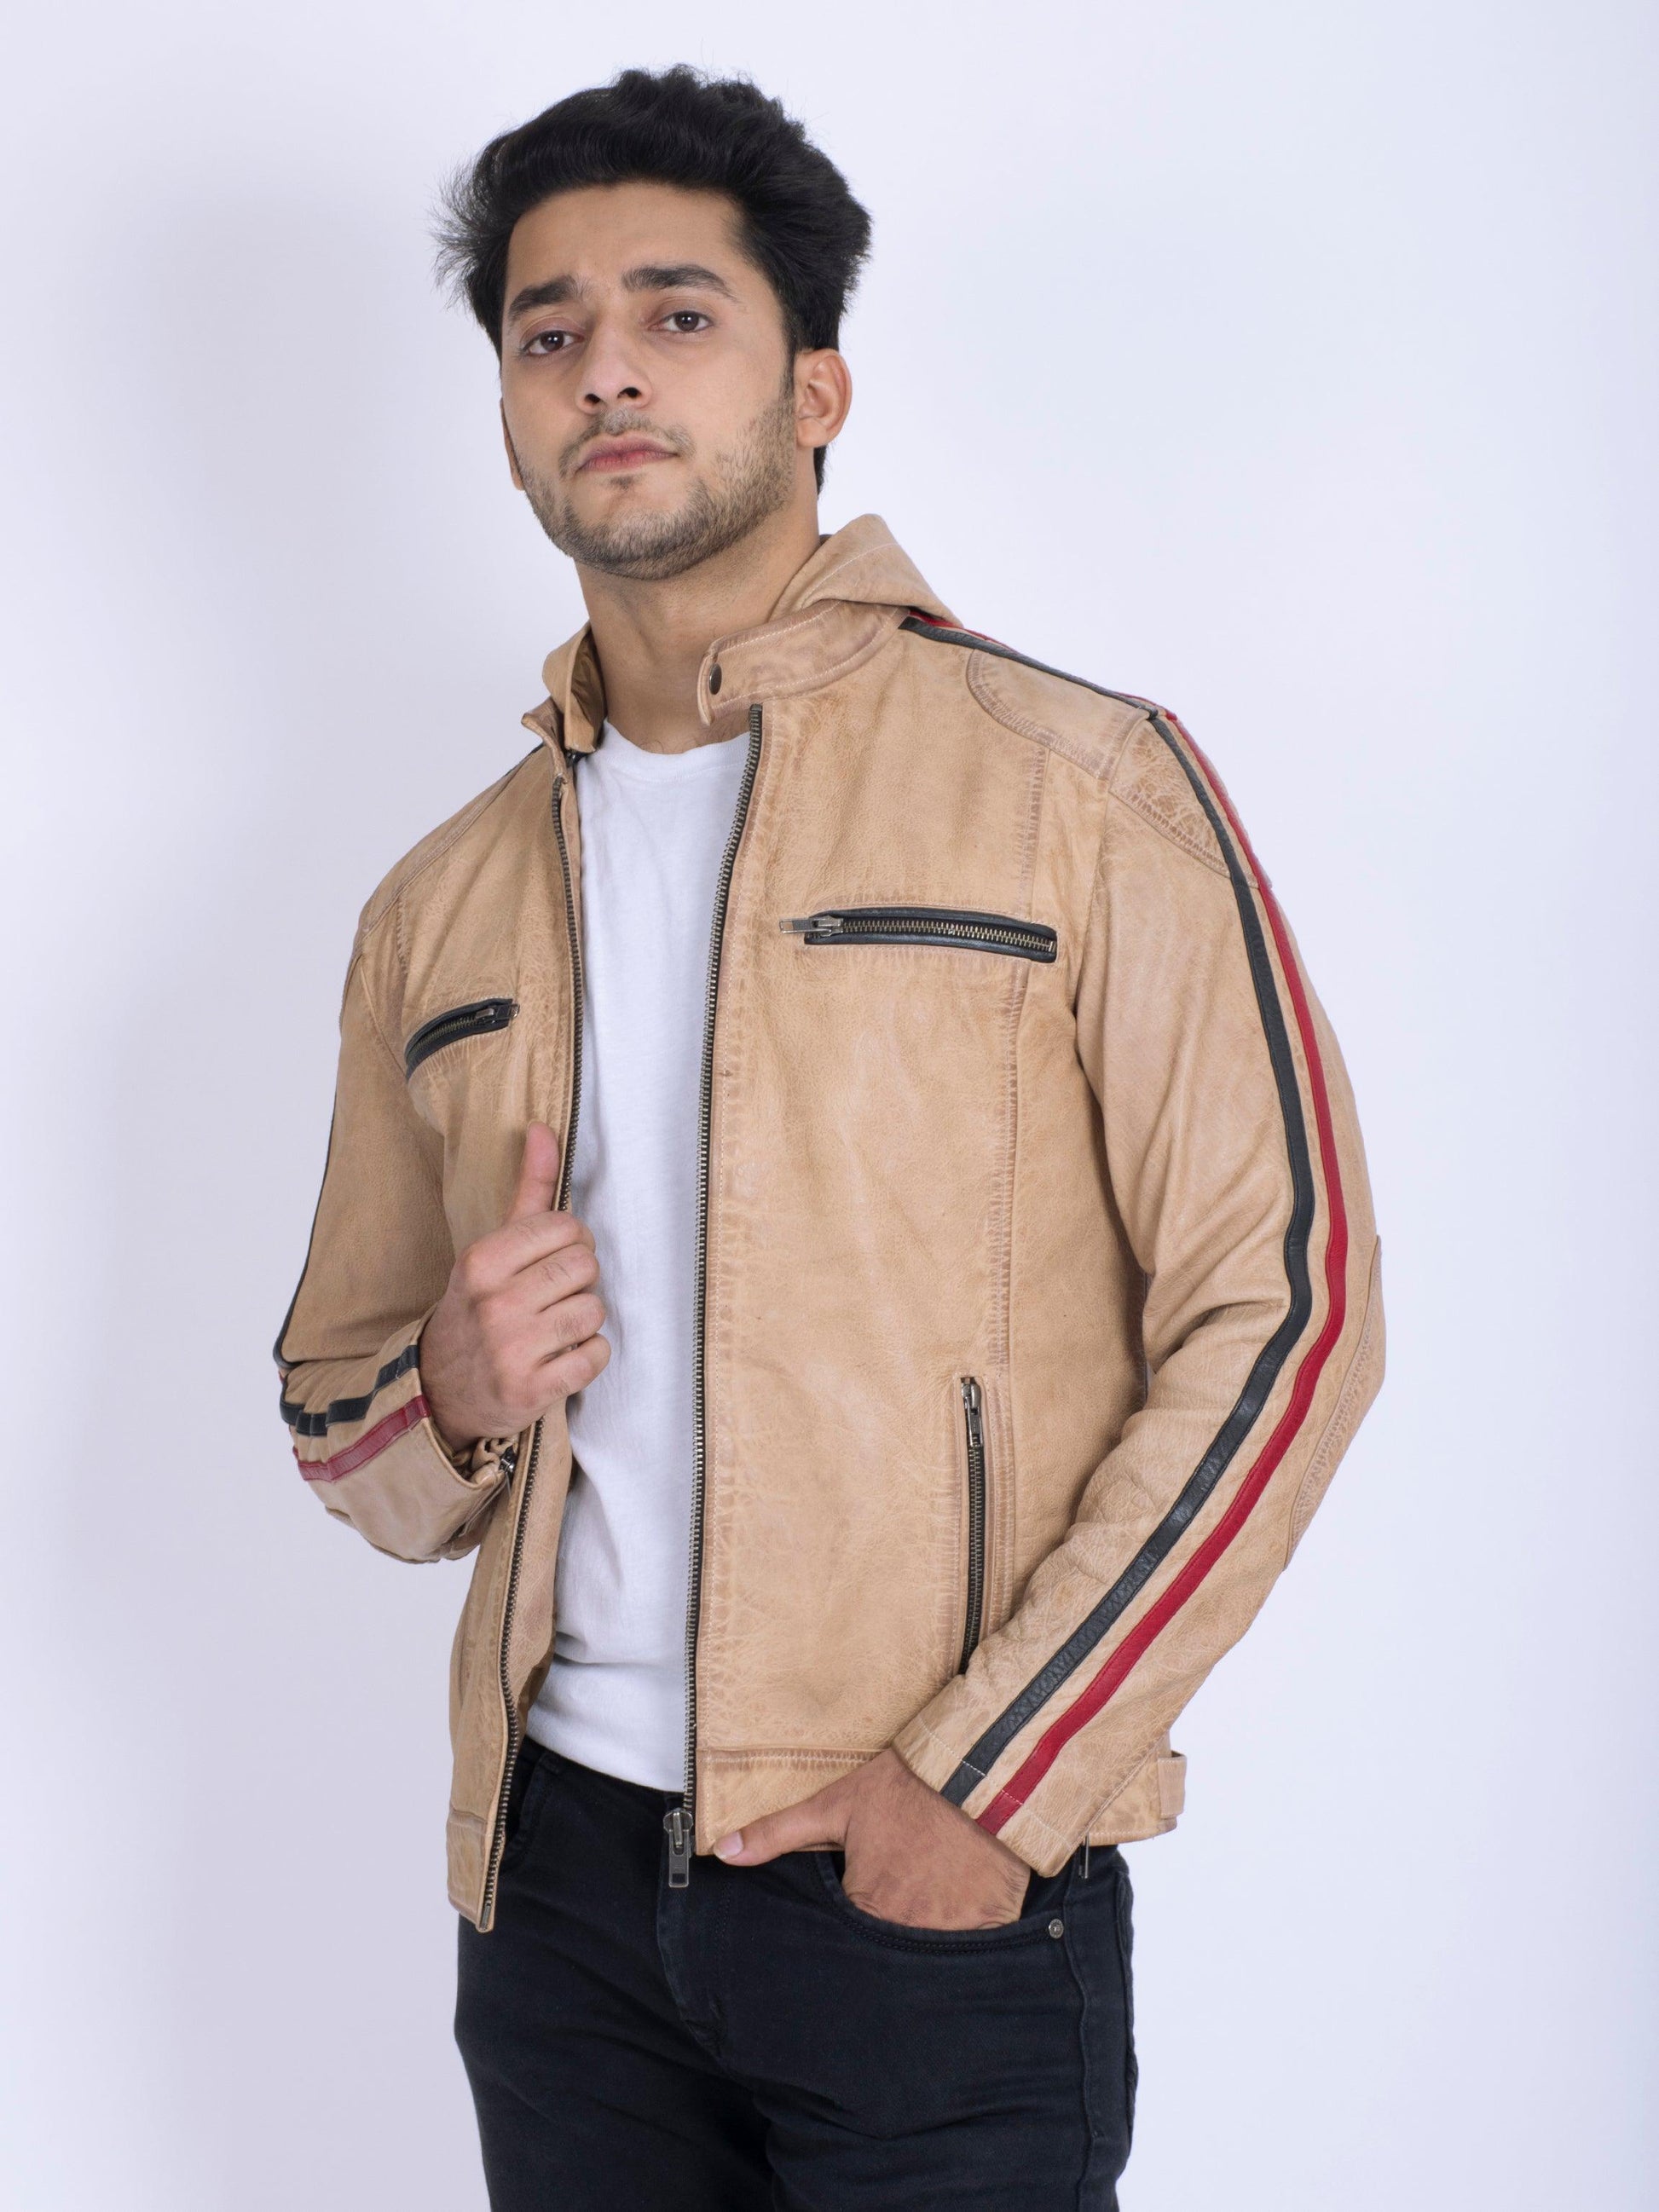 Contrast Cowhide Distressed Look Vintage Ivory Leather Jacket - CASA OF K Official Online Store